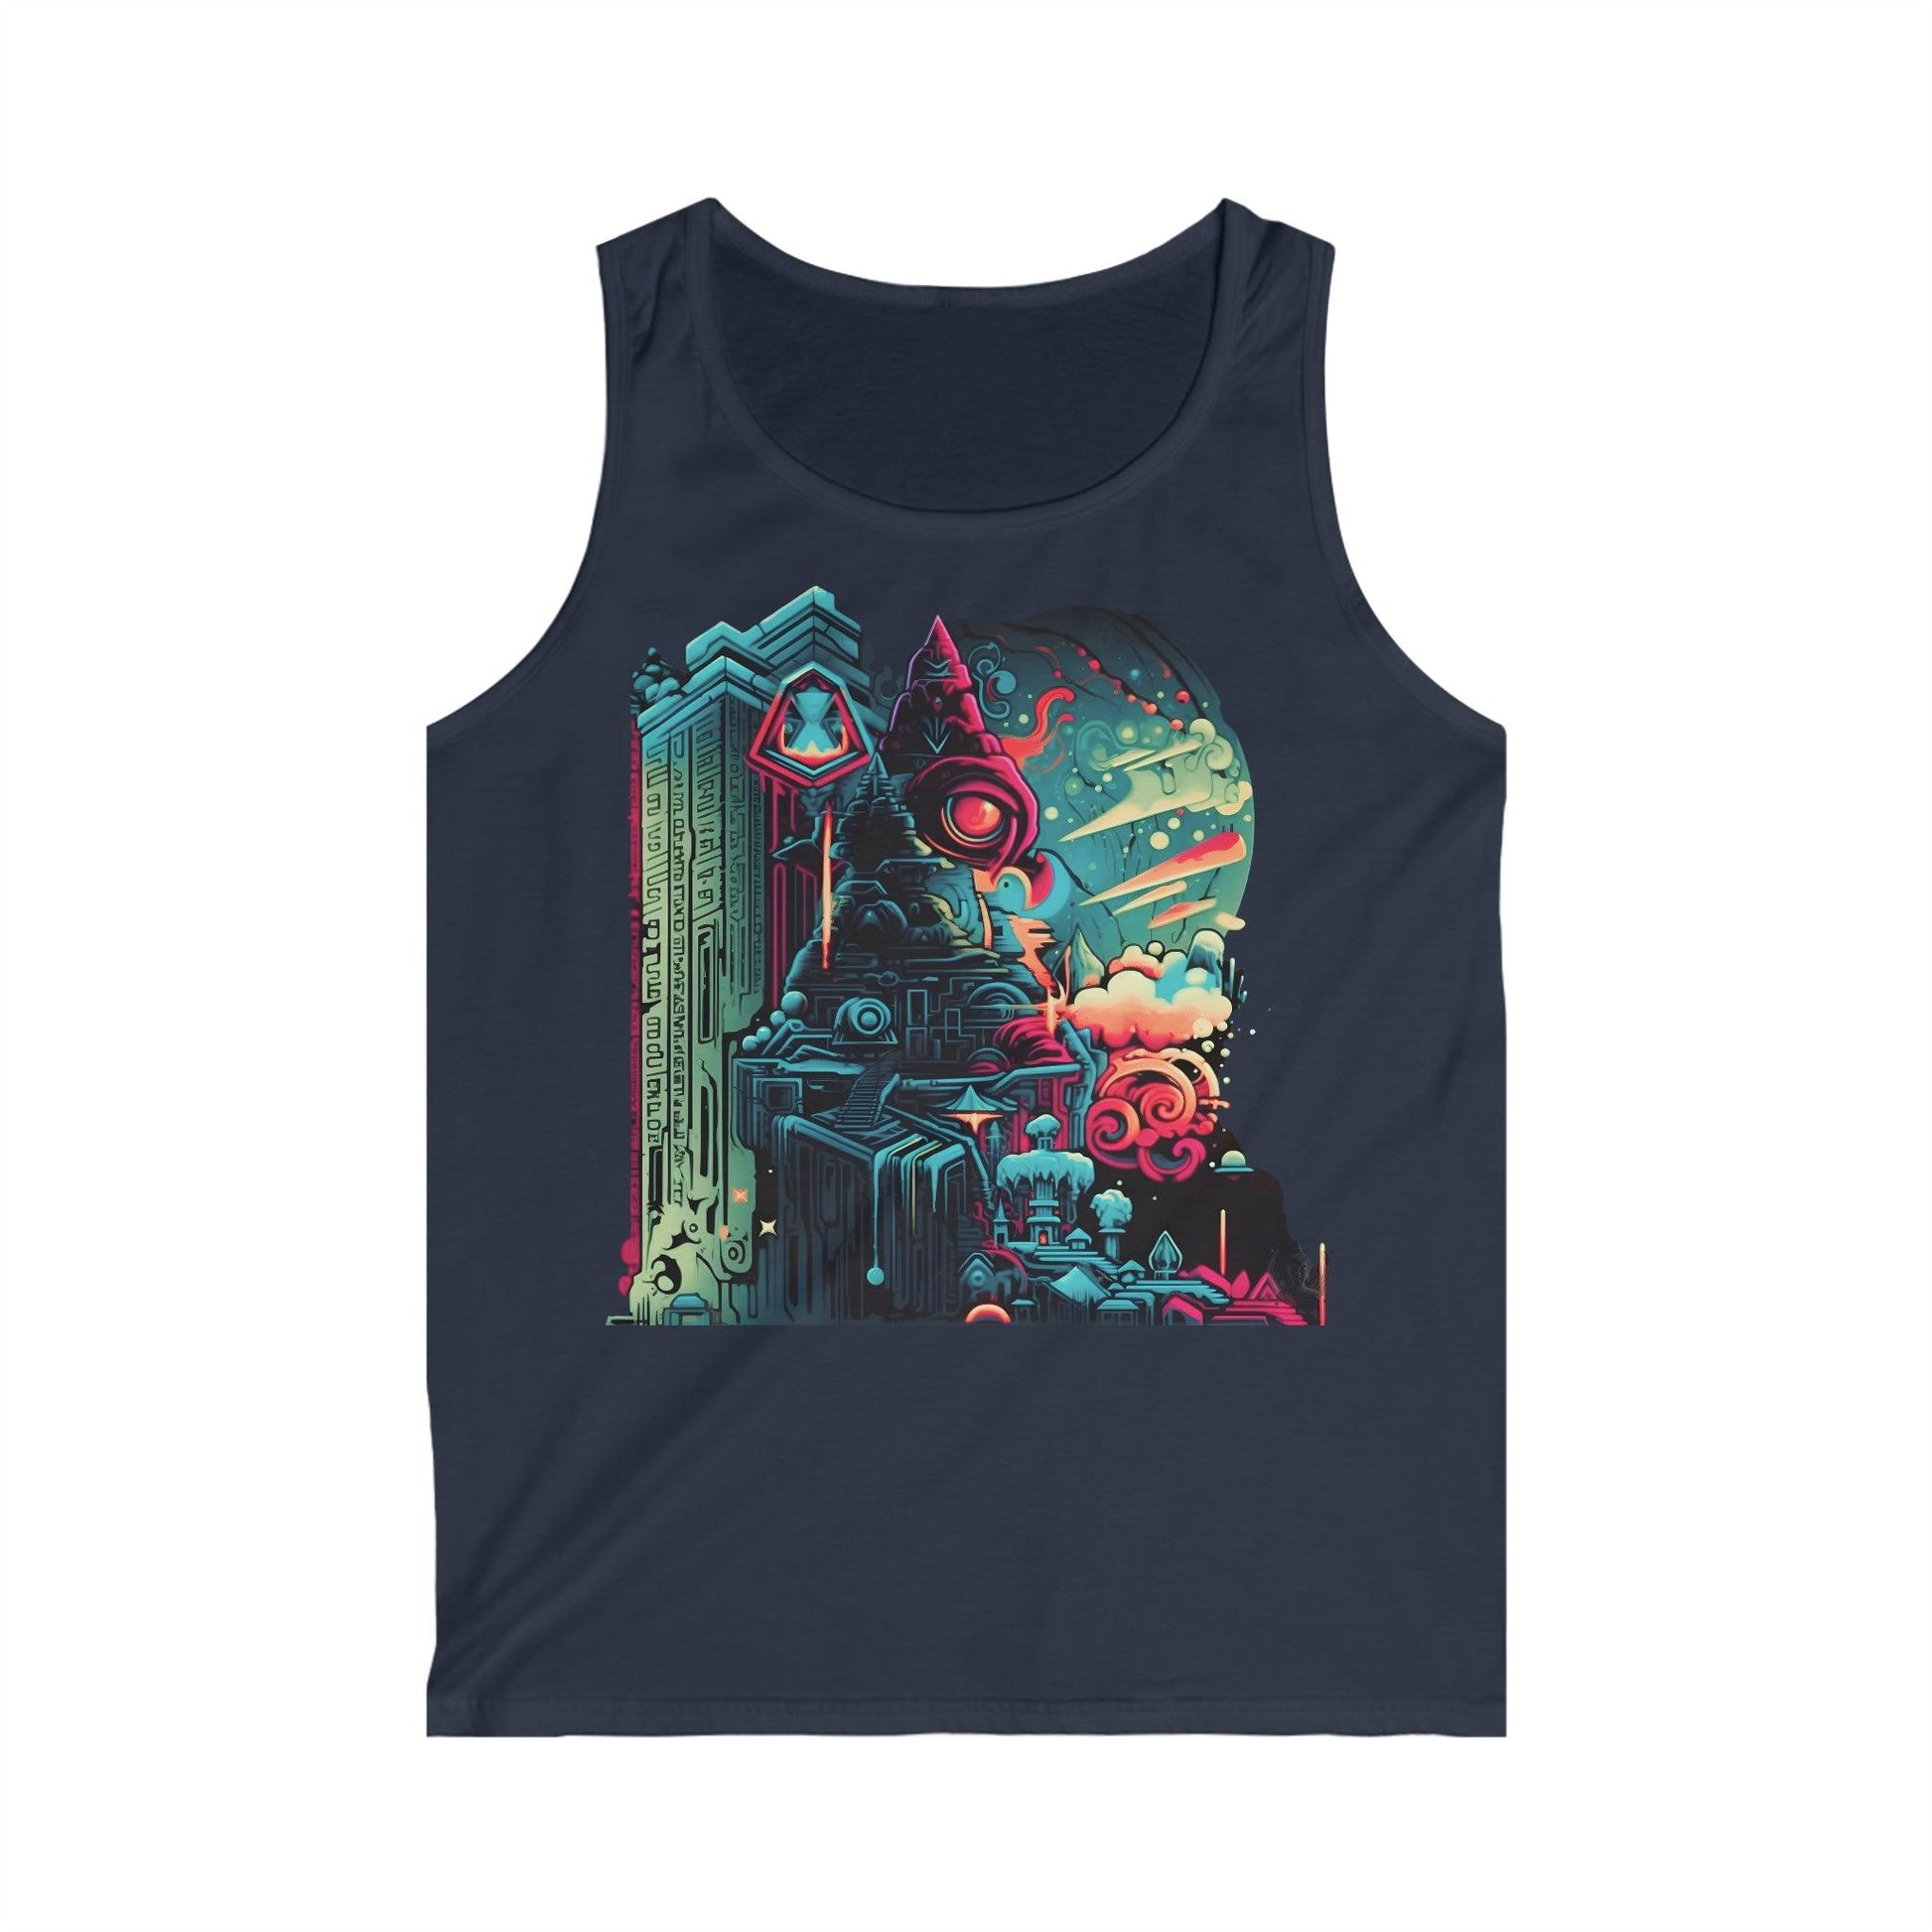 The Alchemystical Dream Illustration Men's and Women's Unisex Softstyle Tank Top for Festival and Street Wear - Alchemystics.org